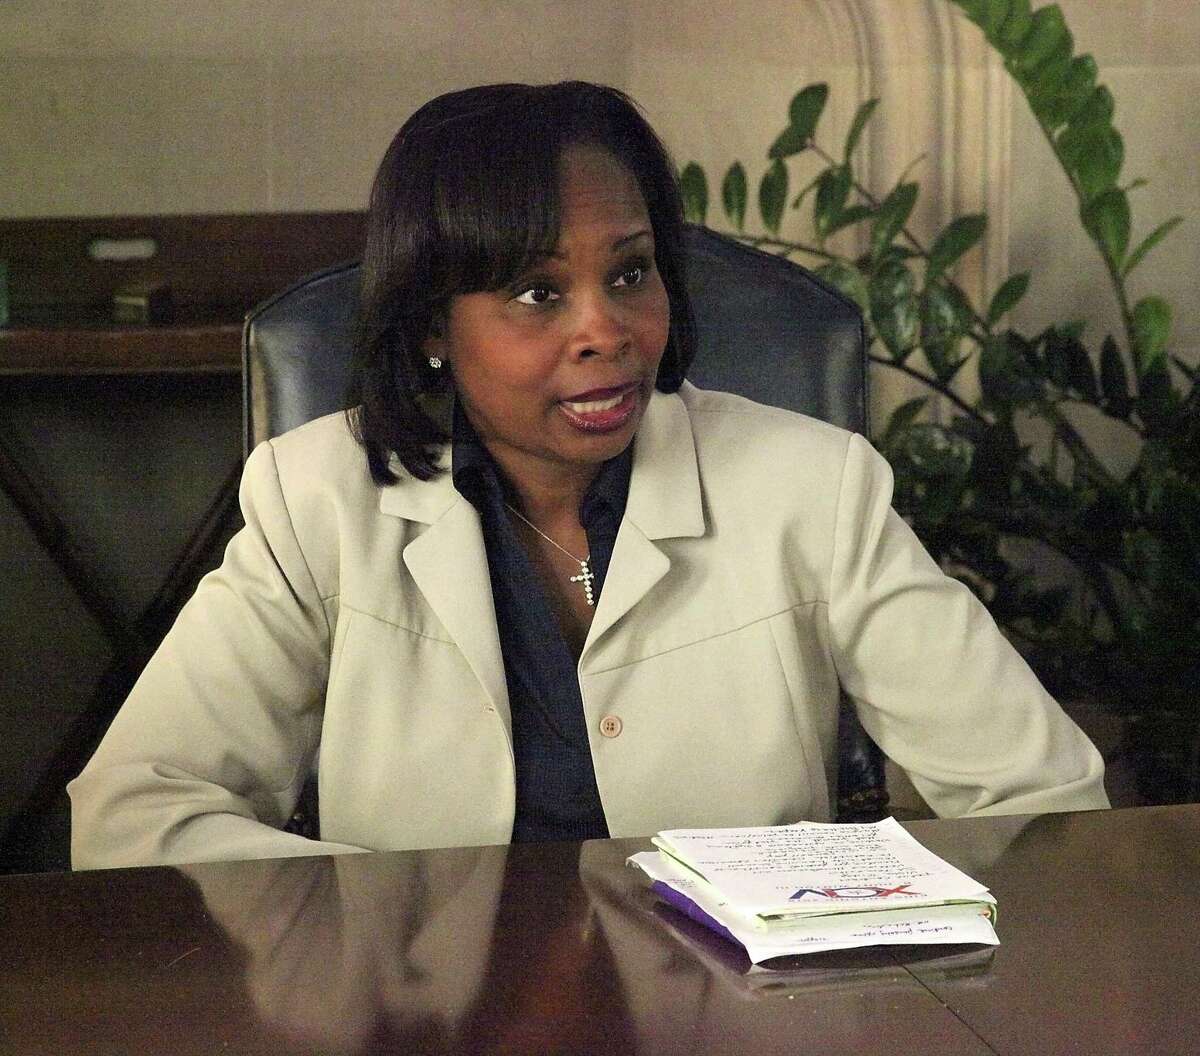 Mayor Ivy Taylor responds to a viral video of her saying that she viewed the “deepest systemic causes of generational poverty” in San Antonio as “broken people” who are not “in relationship with their Creator.”